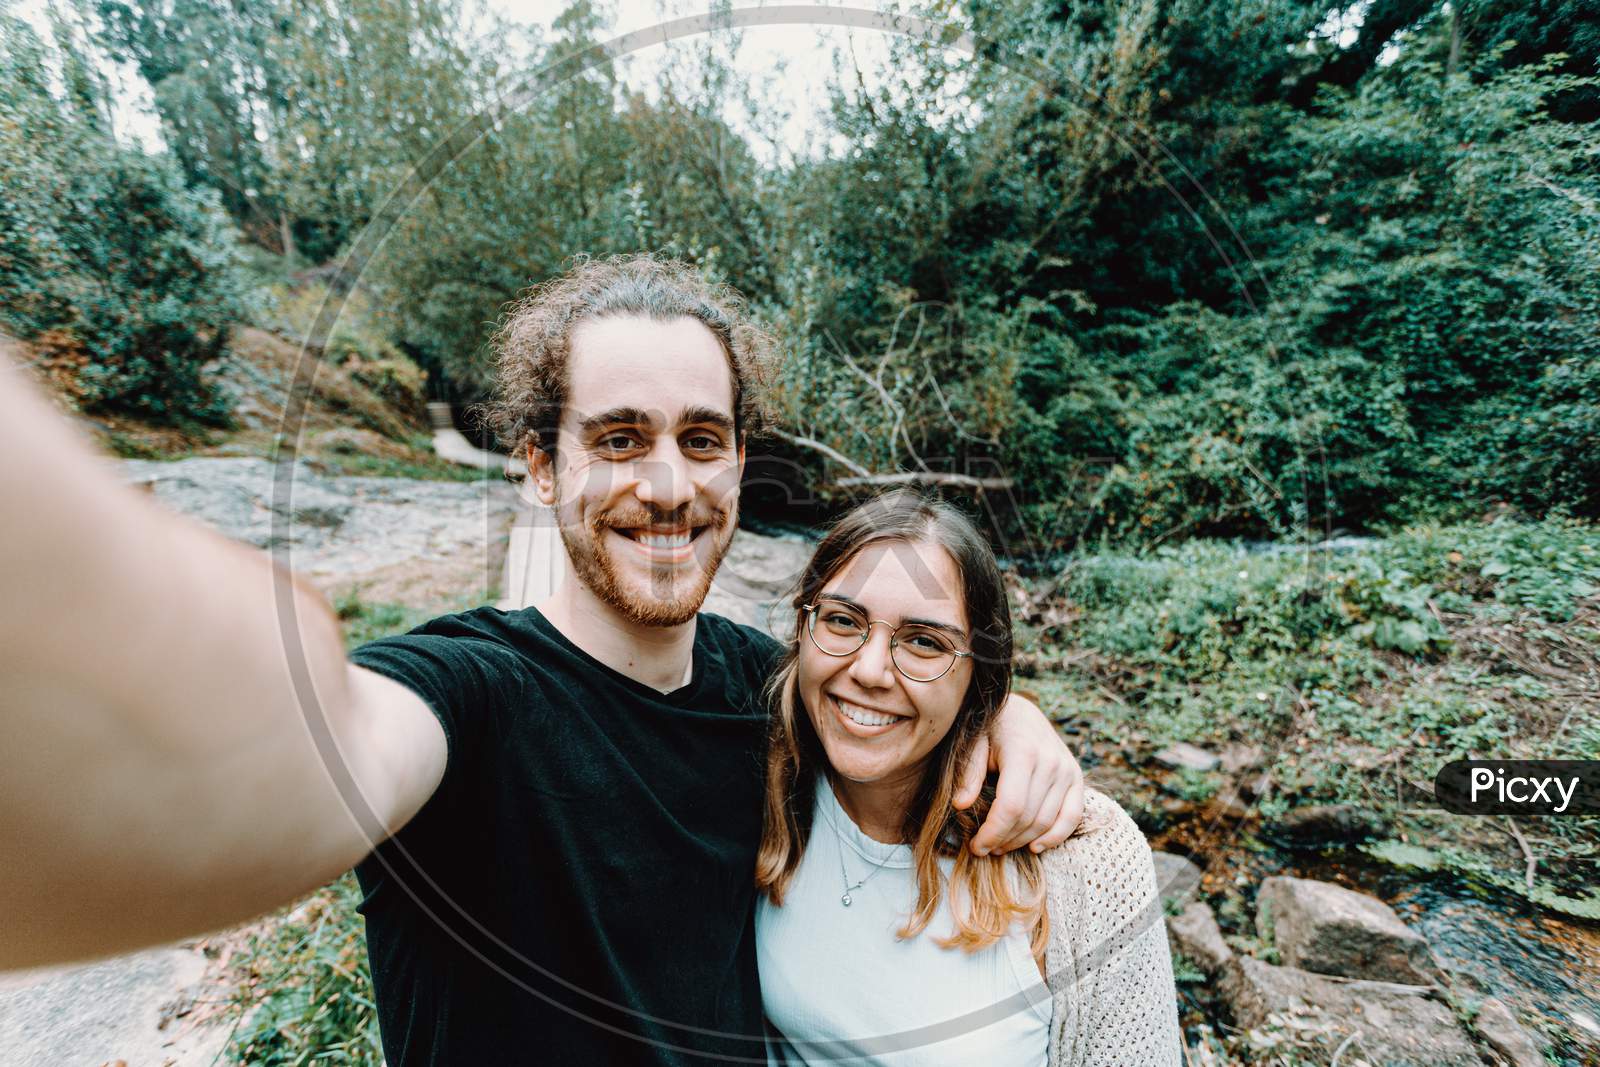 Selfie Of A Young Couple Giving A Bis Smile To The Camera On The Forest